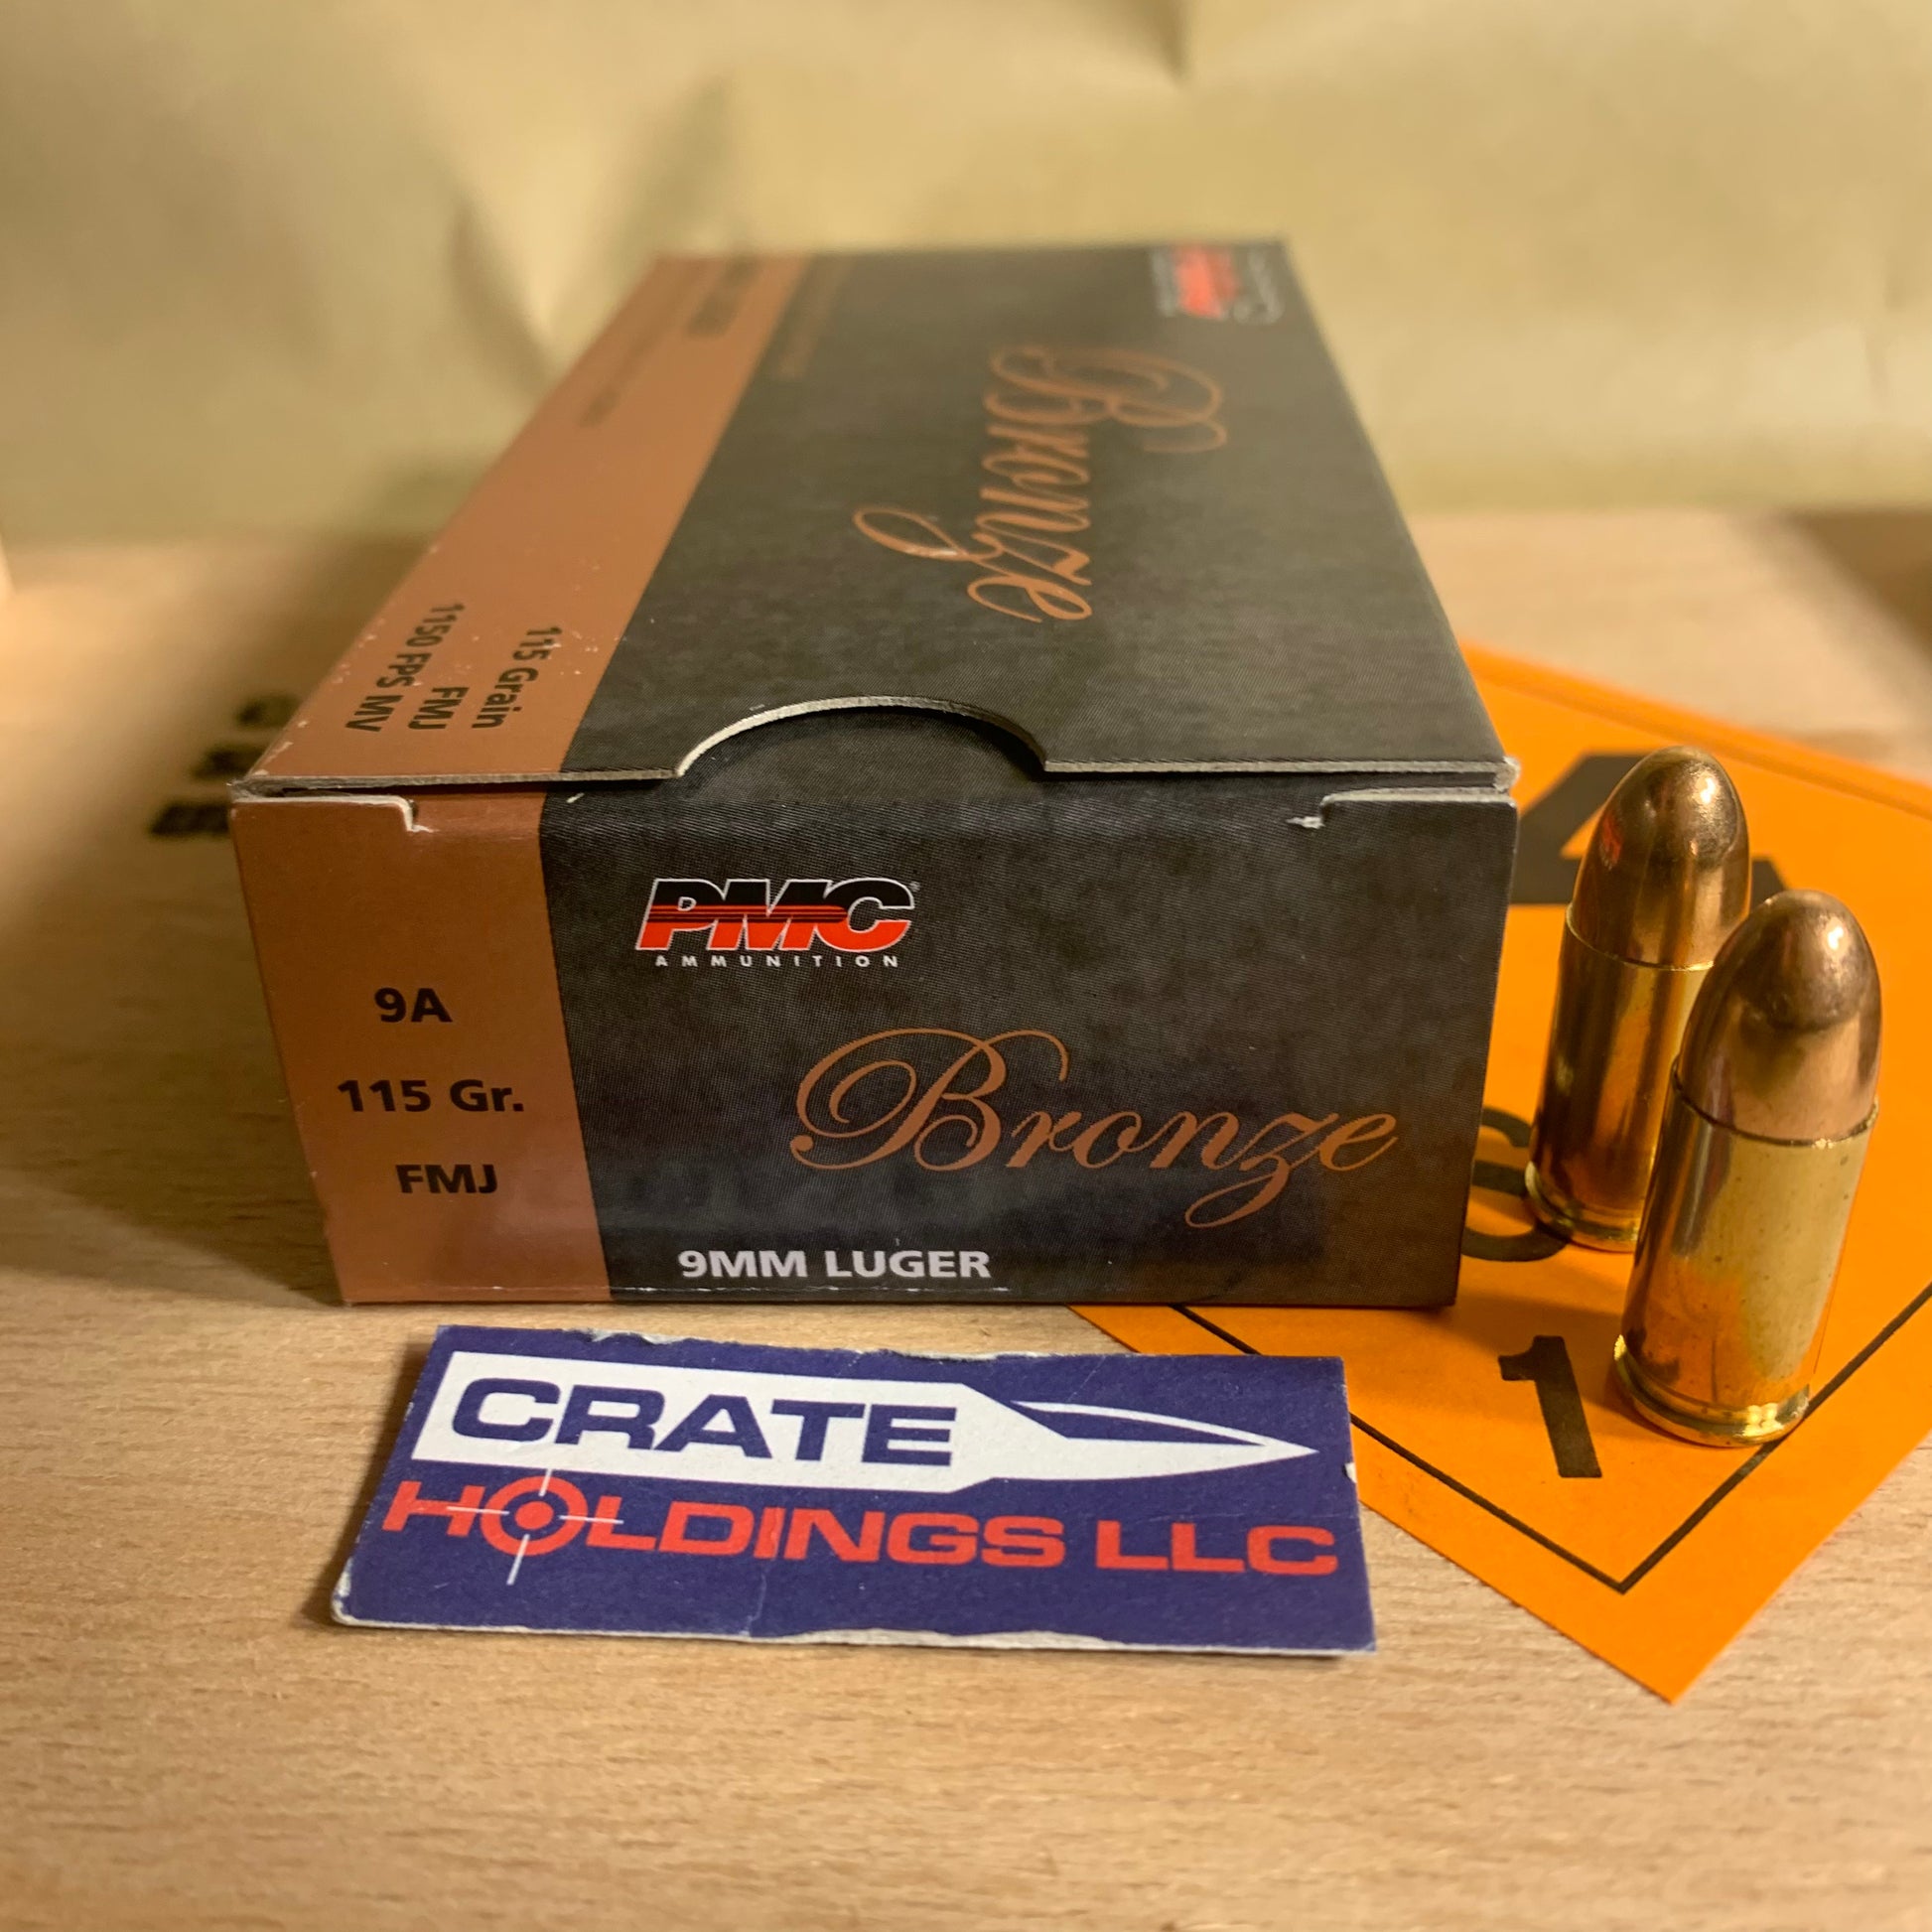 50 Round Box PMC Bronze 9mm Luger Ammo 115gr FMJ - 9A